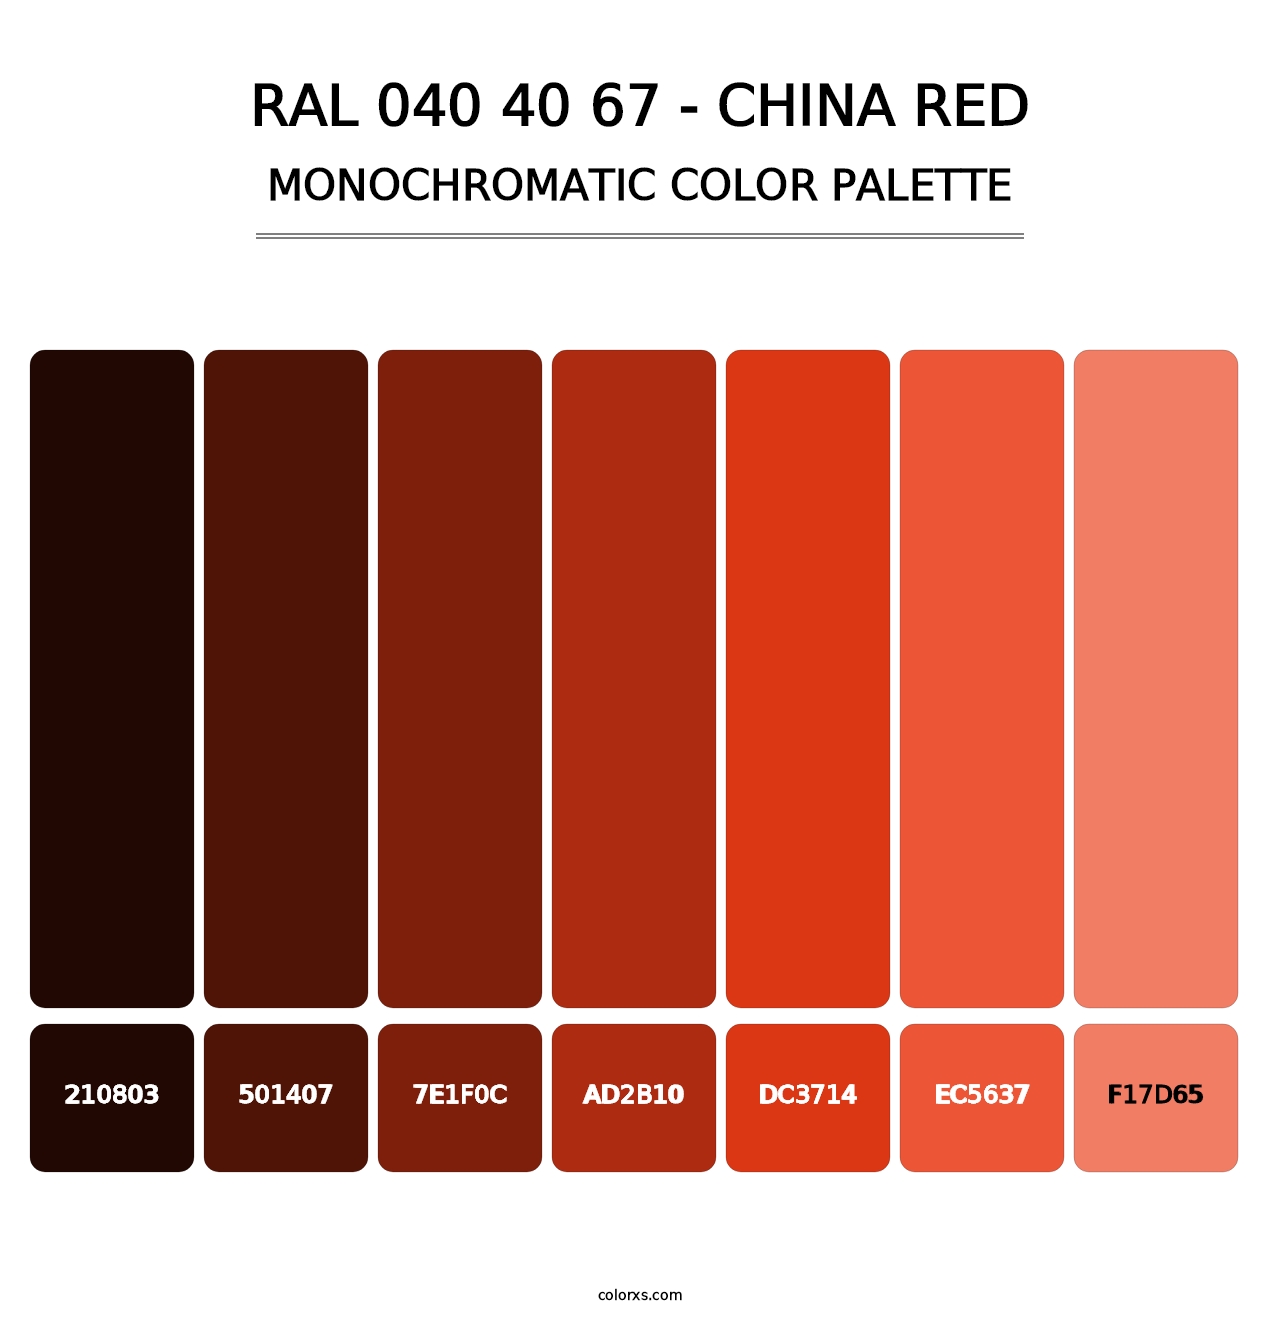 RAL 040 40 67 - China Red - Monochromatic Color Palette